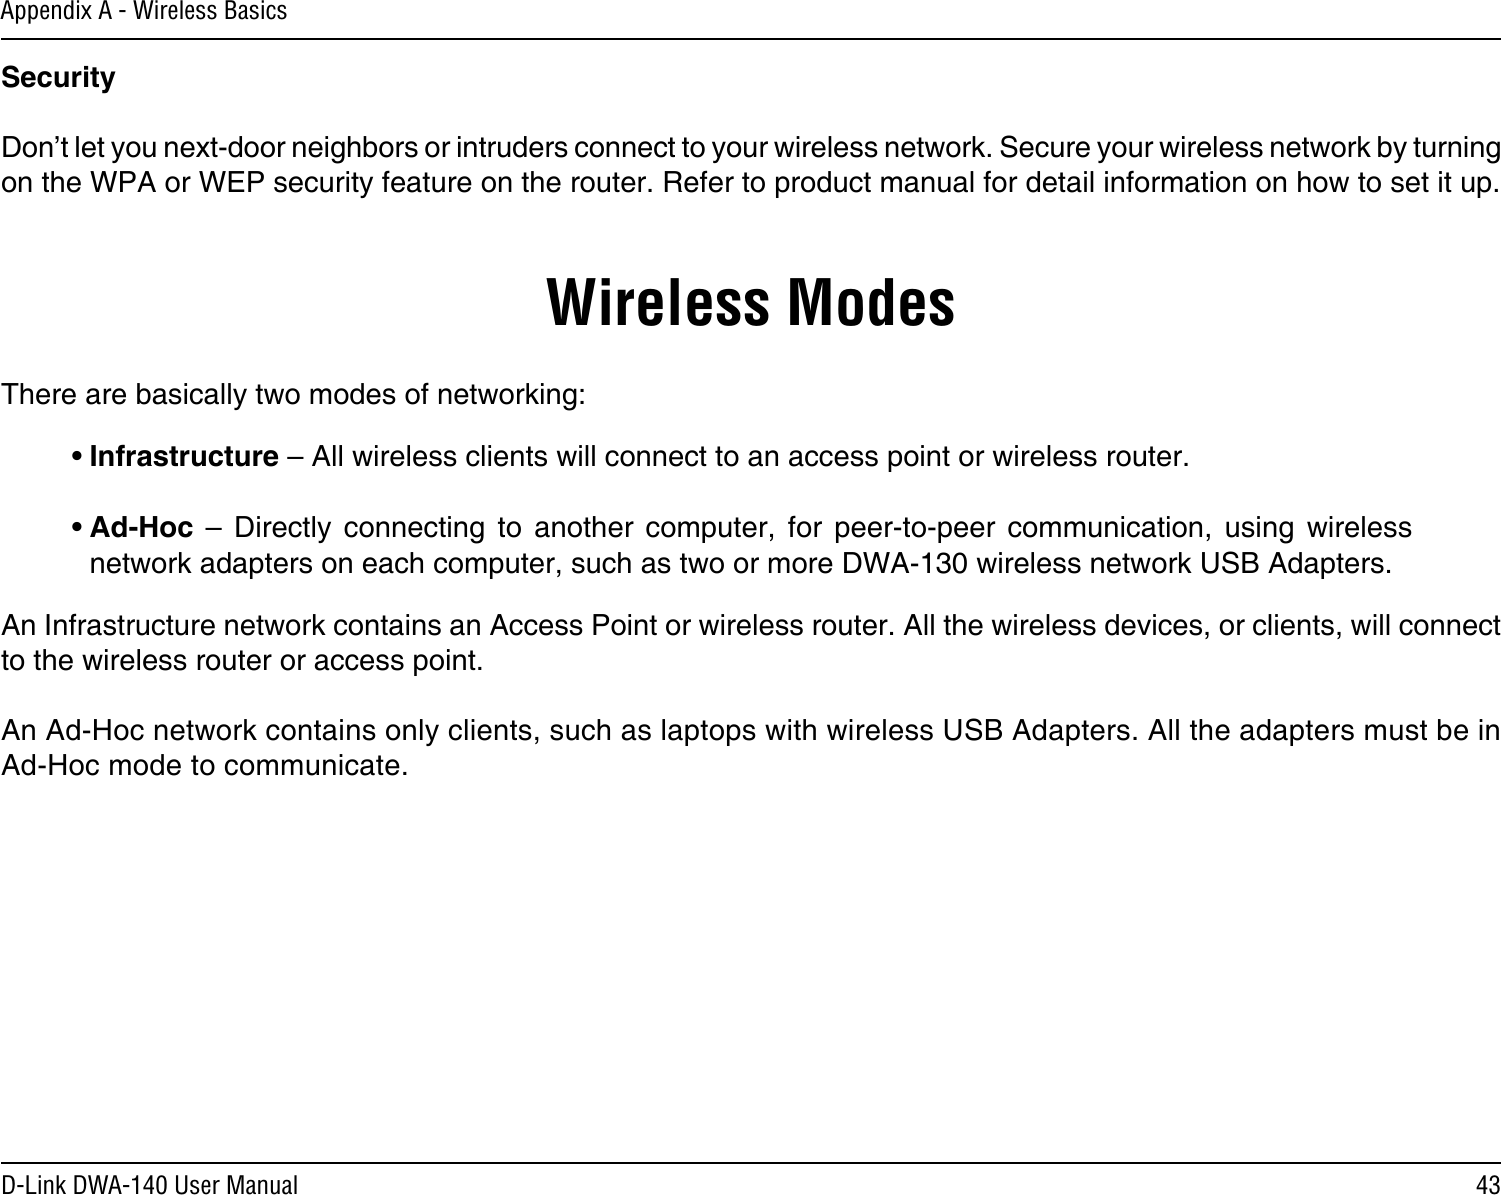 43D-Link DWA-140 User ManualAppendix A - Wireless BasicsSecurity   Don’t let you next-door neighbors or intruders connect to your wireless network. Secure your wireless network by turning on the WPA or WEP security feature on the router. Refer to product manual for detail information on how to set it up.     There are basically two modes of networking: • Infrastructure – All wireless clients will connect to an access point or wireless router.• Ad-Hoc  –  Directly  connecting  to  another  computer,  for  peer-to-peer  communication,  using  wireless network adapters on each computer, such as two or more DWA-130 wireless network USB Adapters.An Infrastructure network contains an Access Point or wireless router. All the wireless devices, or clients, will connect to the wireless router or access point. An Ad-Hoc network contains only clients, such as laptops with wireless USB Adapters. All the adapters must be in Ad-Hoc mode to communicate.Wireless Modes